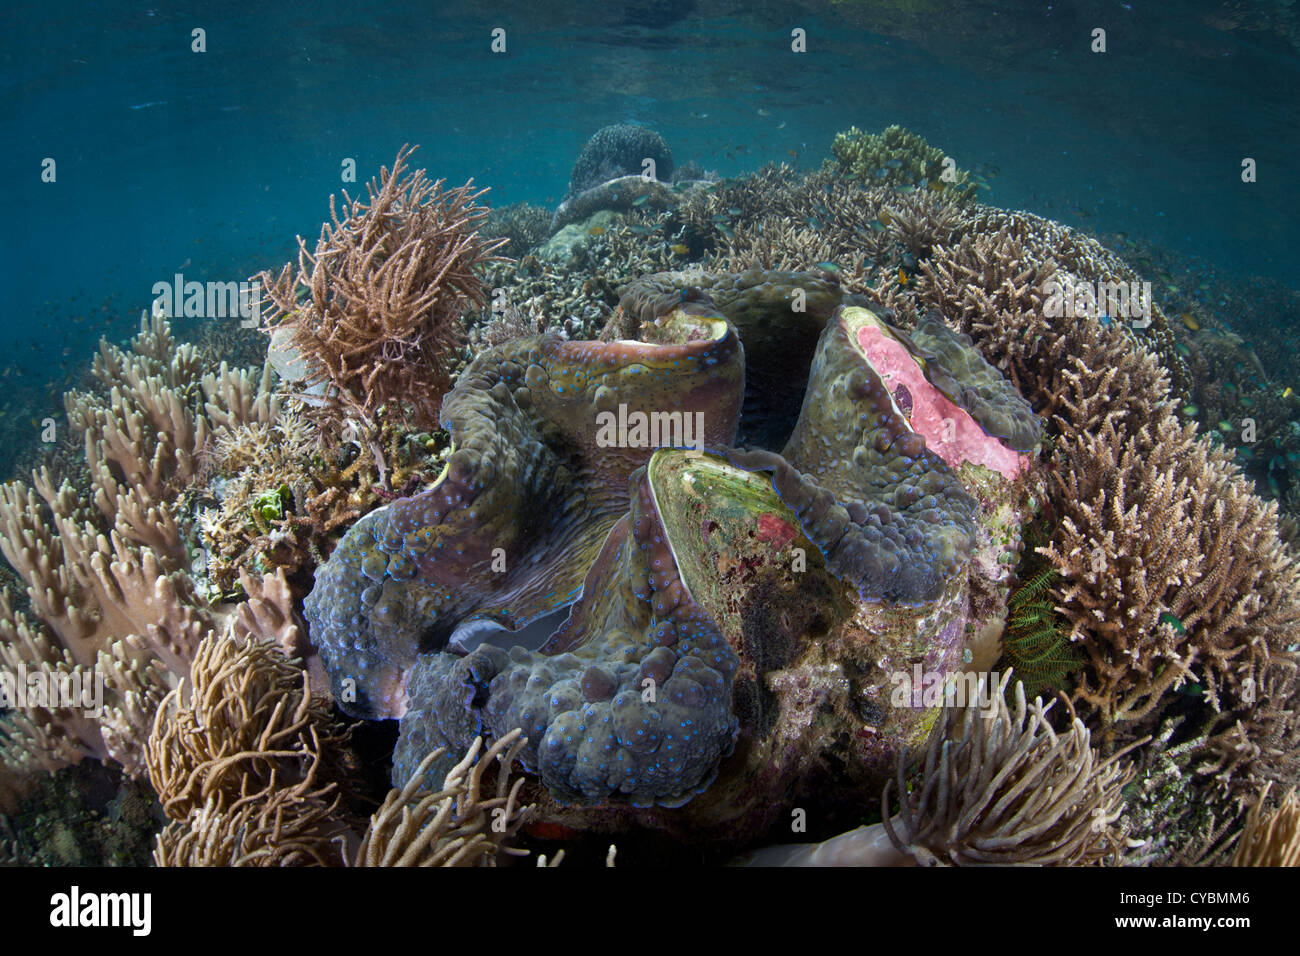 A massive giant clam, Tridacna gigas, grows in very shallow water on a healthy coral reef. This is an endangered species. Stock Photo